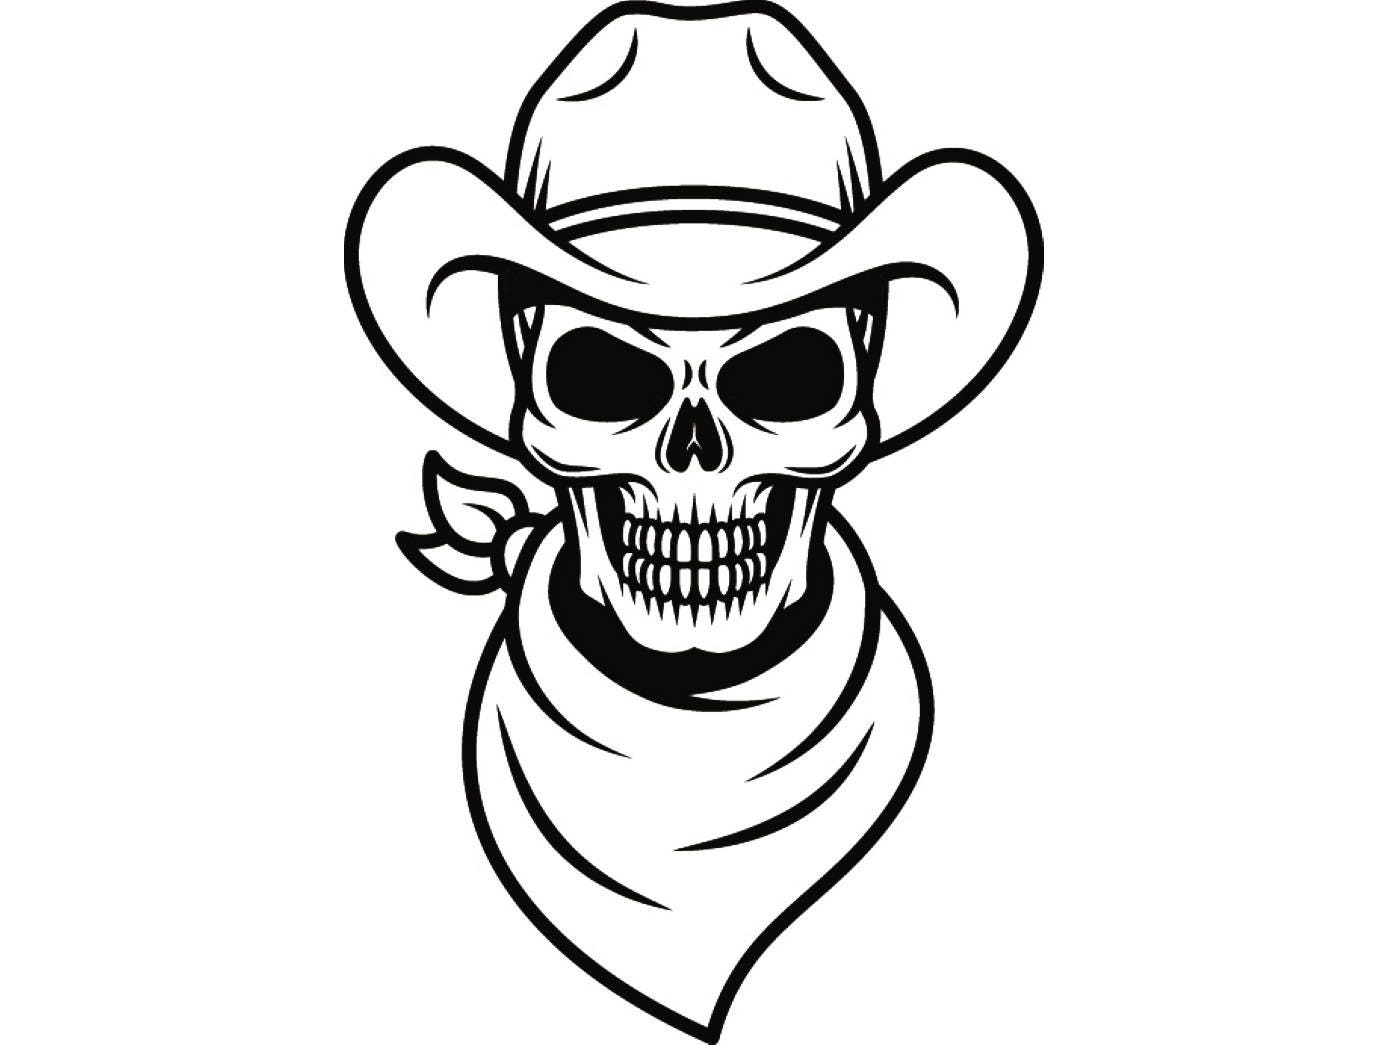 Download Cowboy Skull 9 Skull Scarf Hat Country Western Herder Rodeo